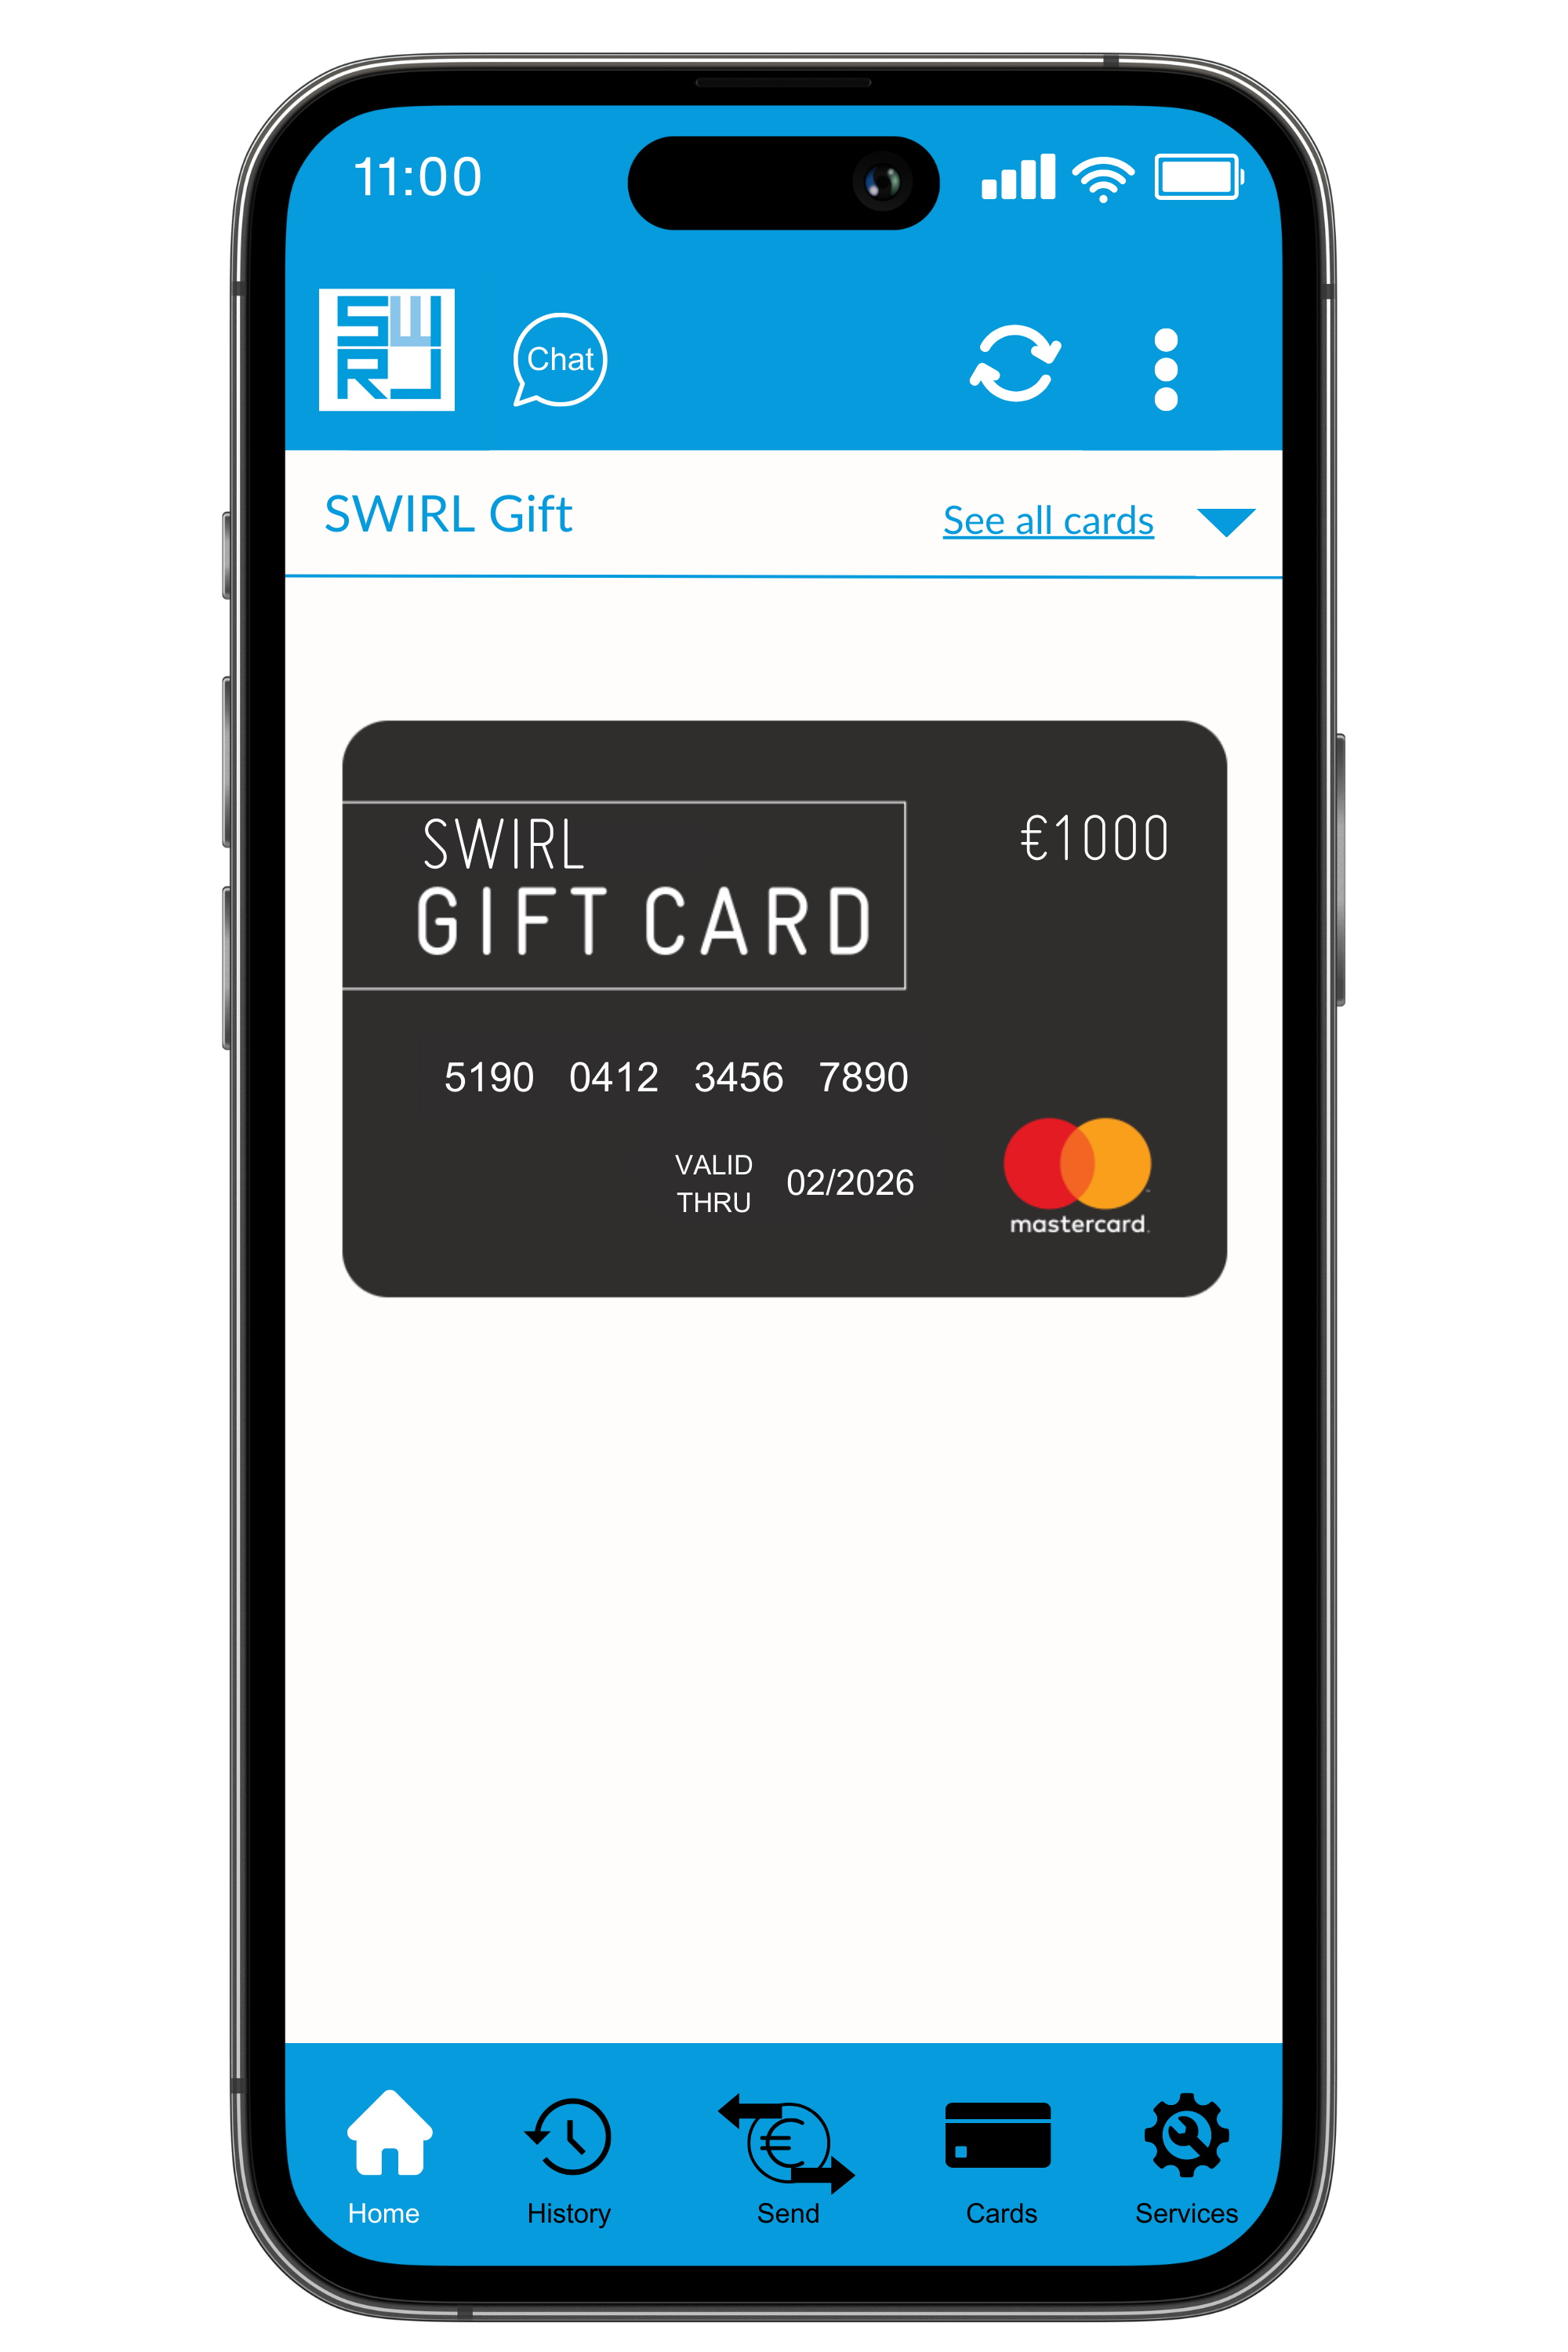 Employee Gift Card App on Phone Screen: Easily manage and redeem gift cards